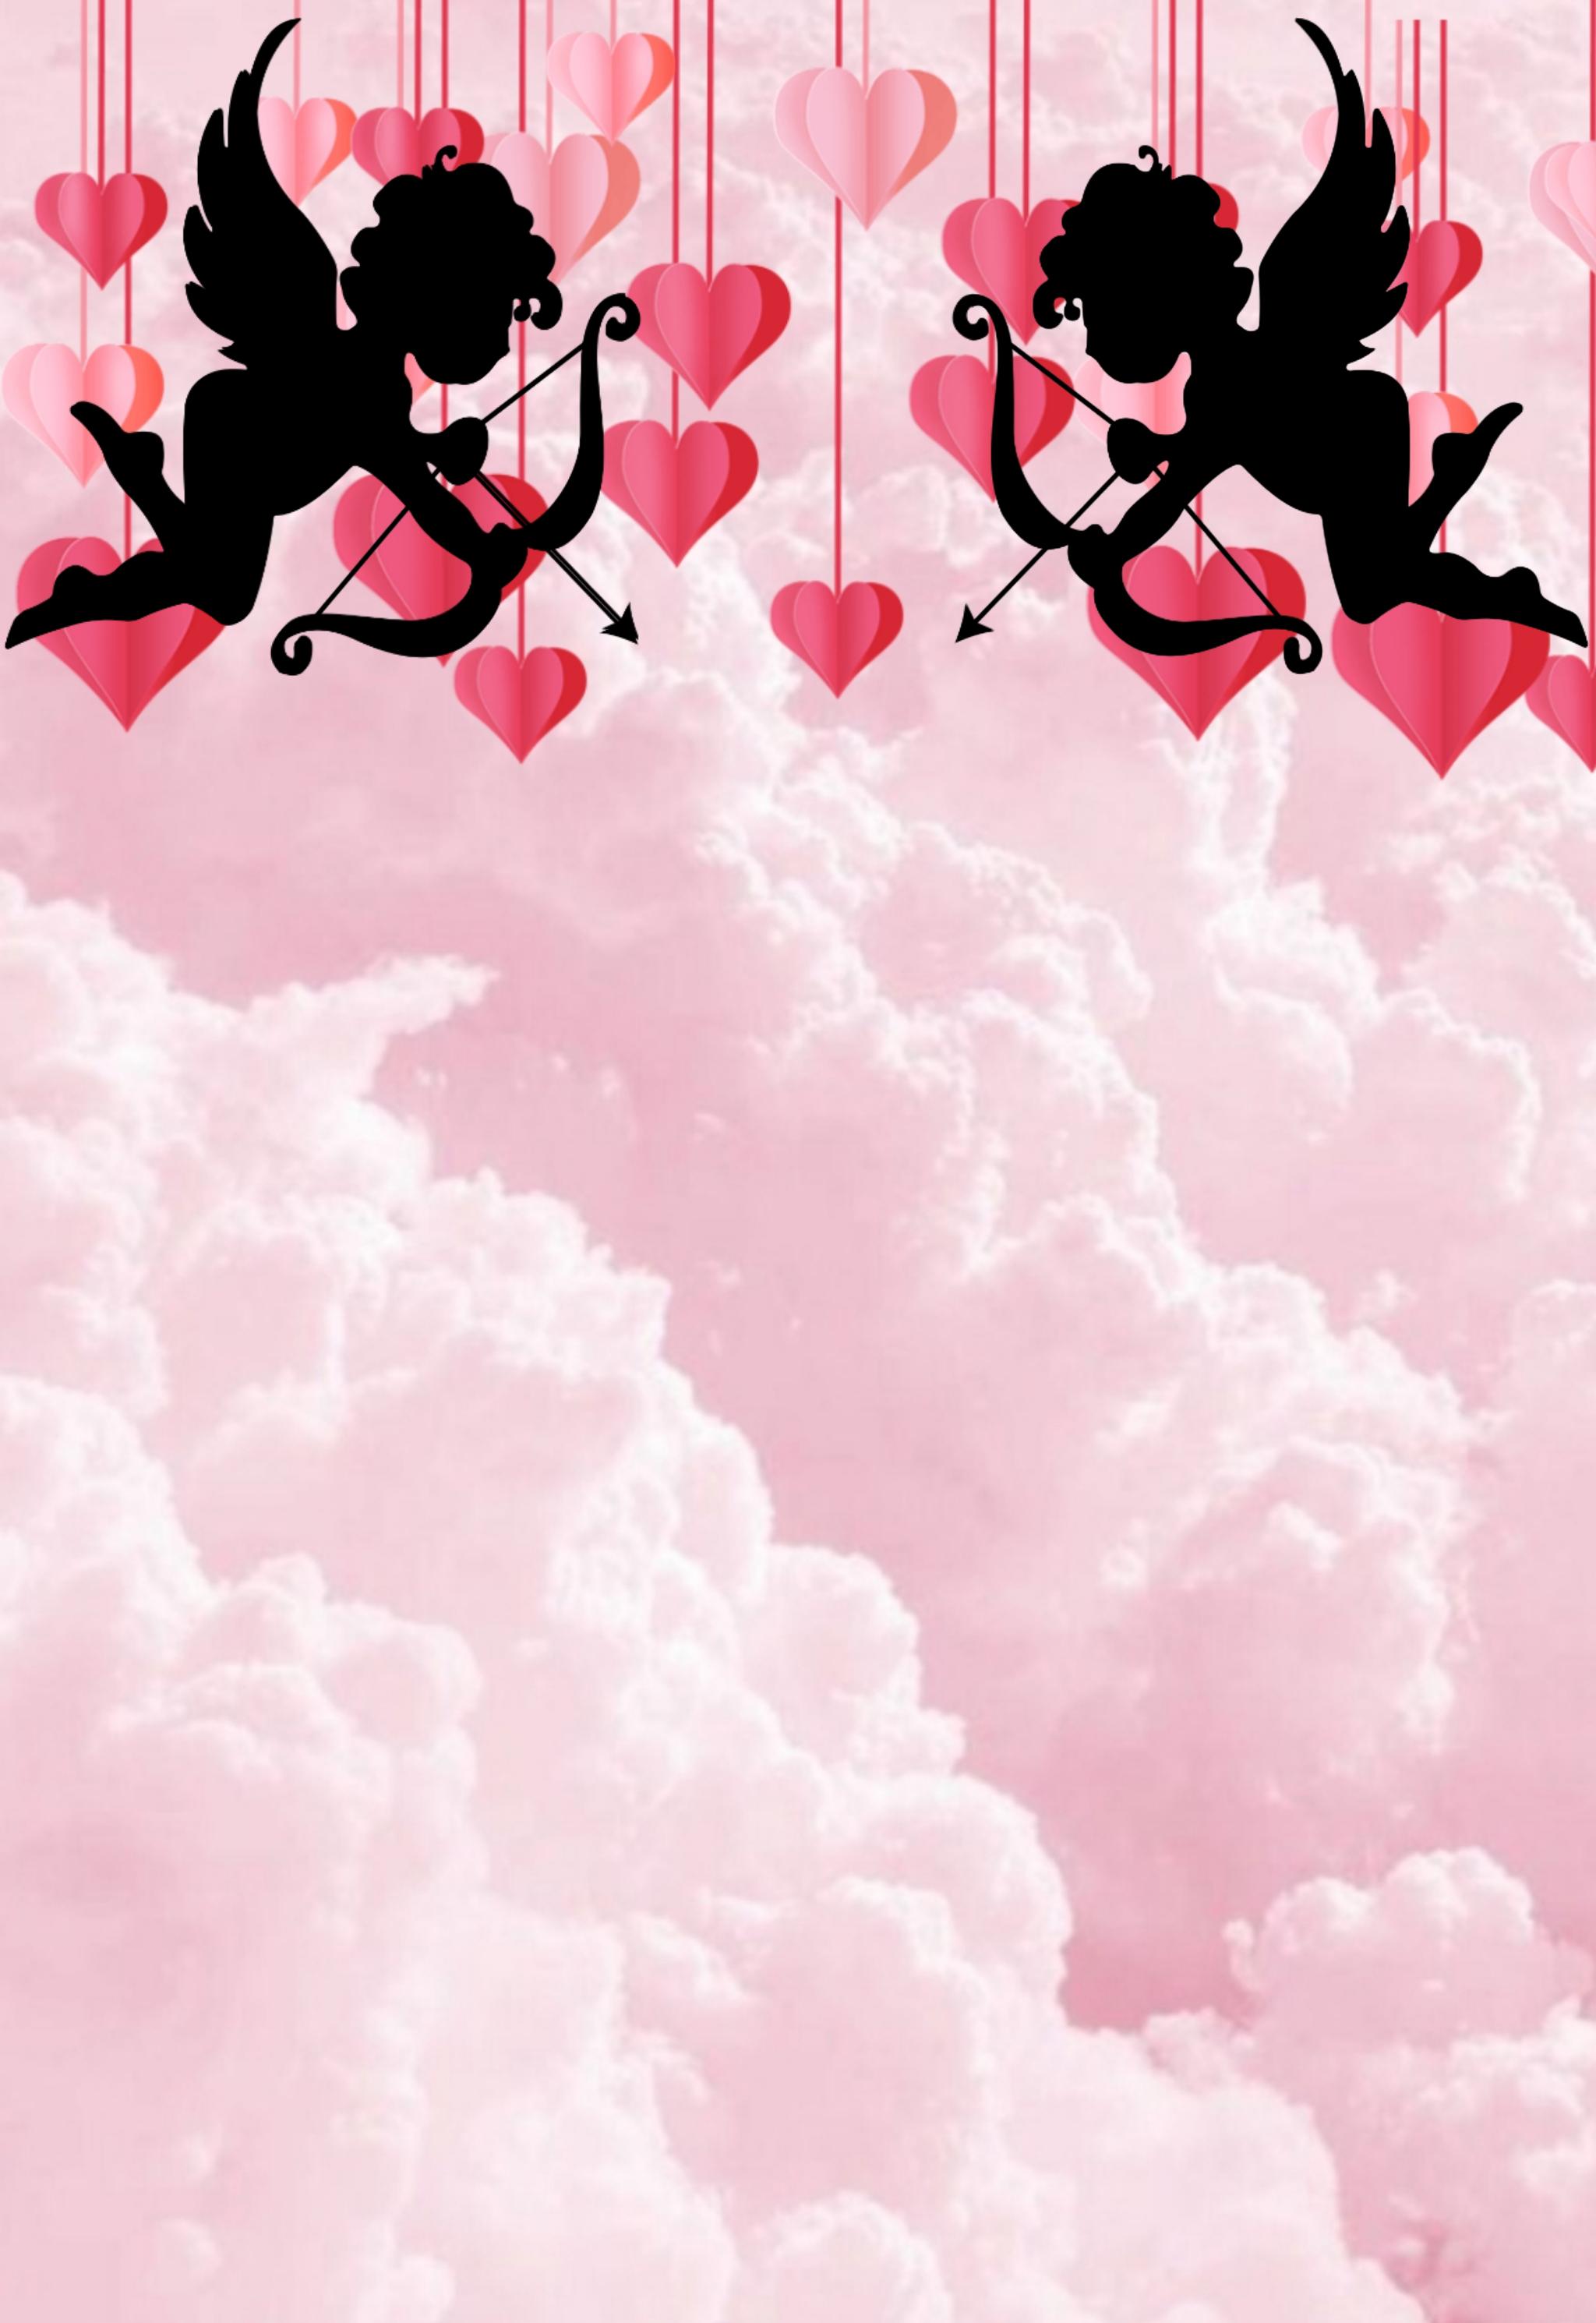 A couple of cupid's are flying in the clouds - Lovecore, Cupid